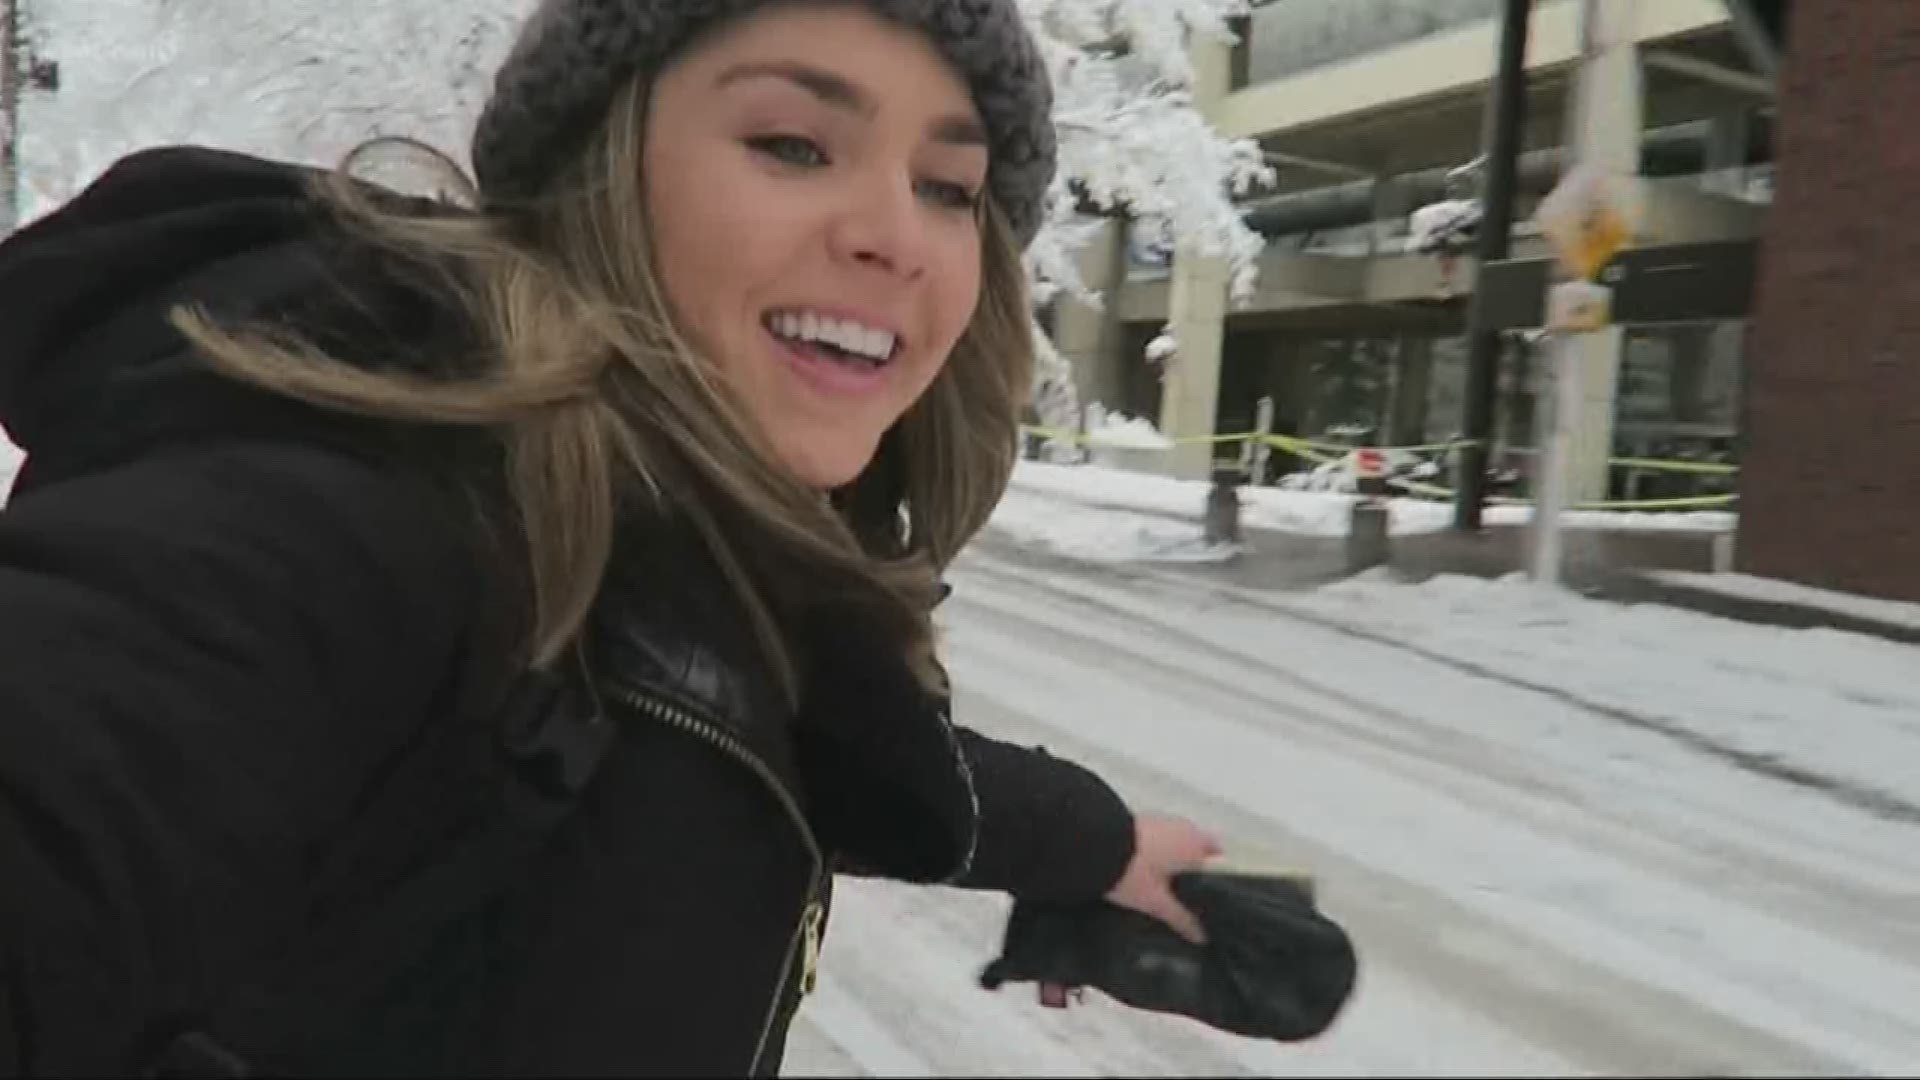 Are you heading up to the mountain this weekend to enjoy the snow?
#TonightwithCassidy